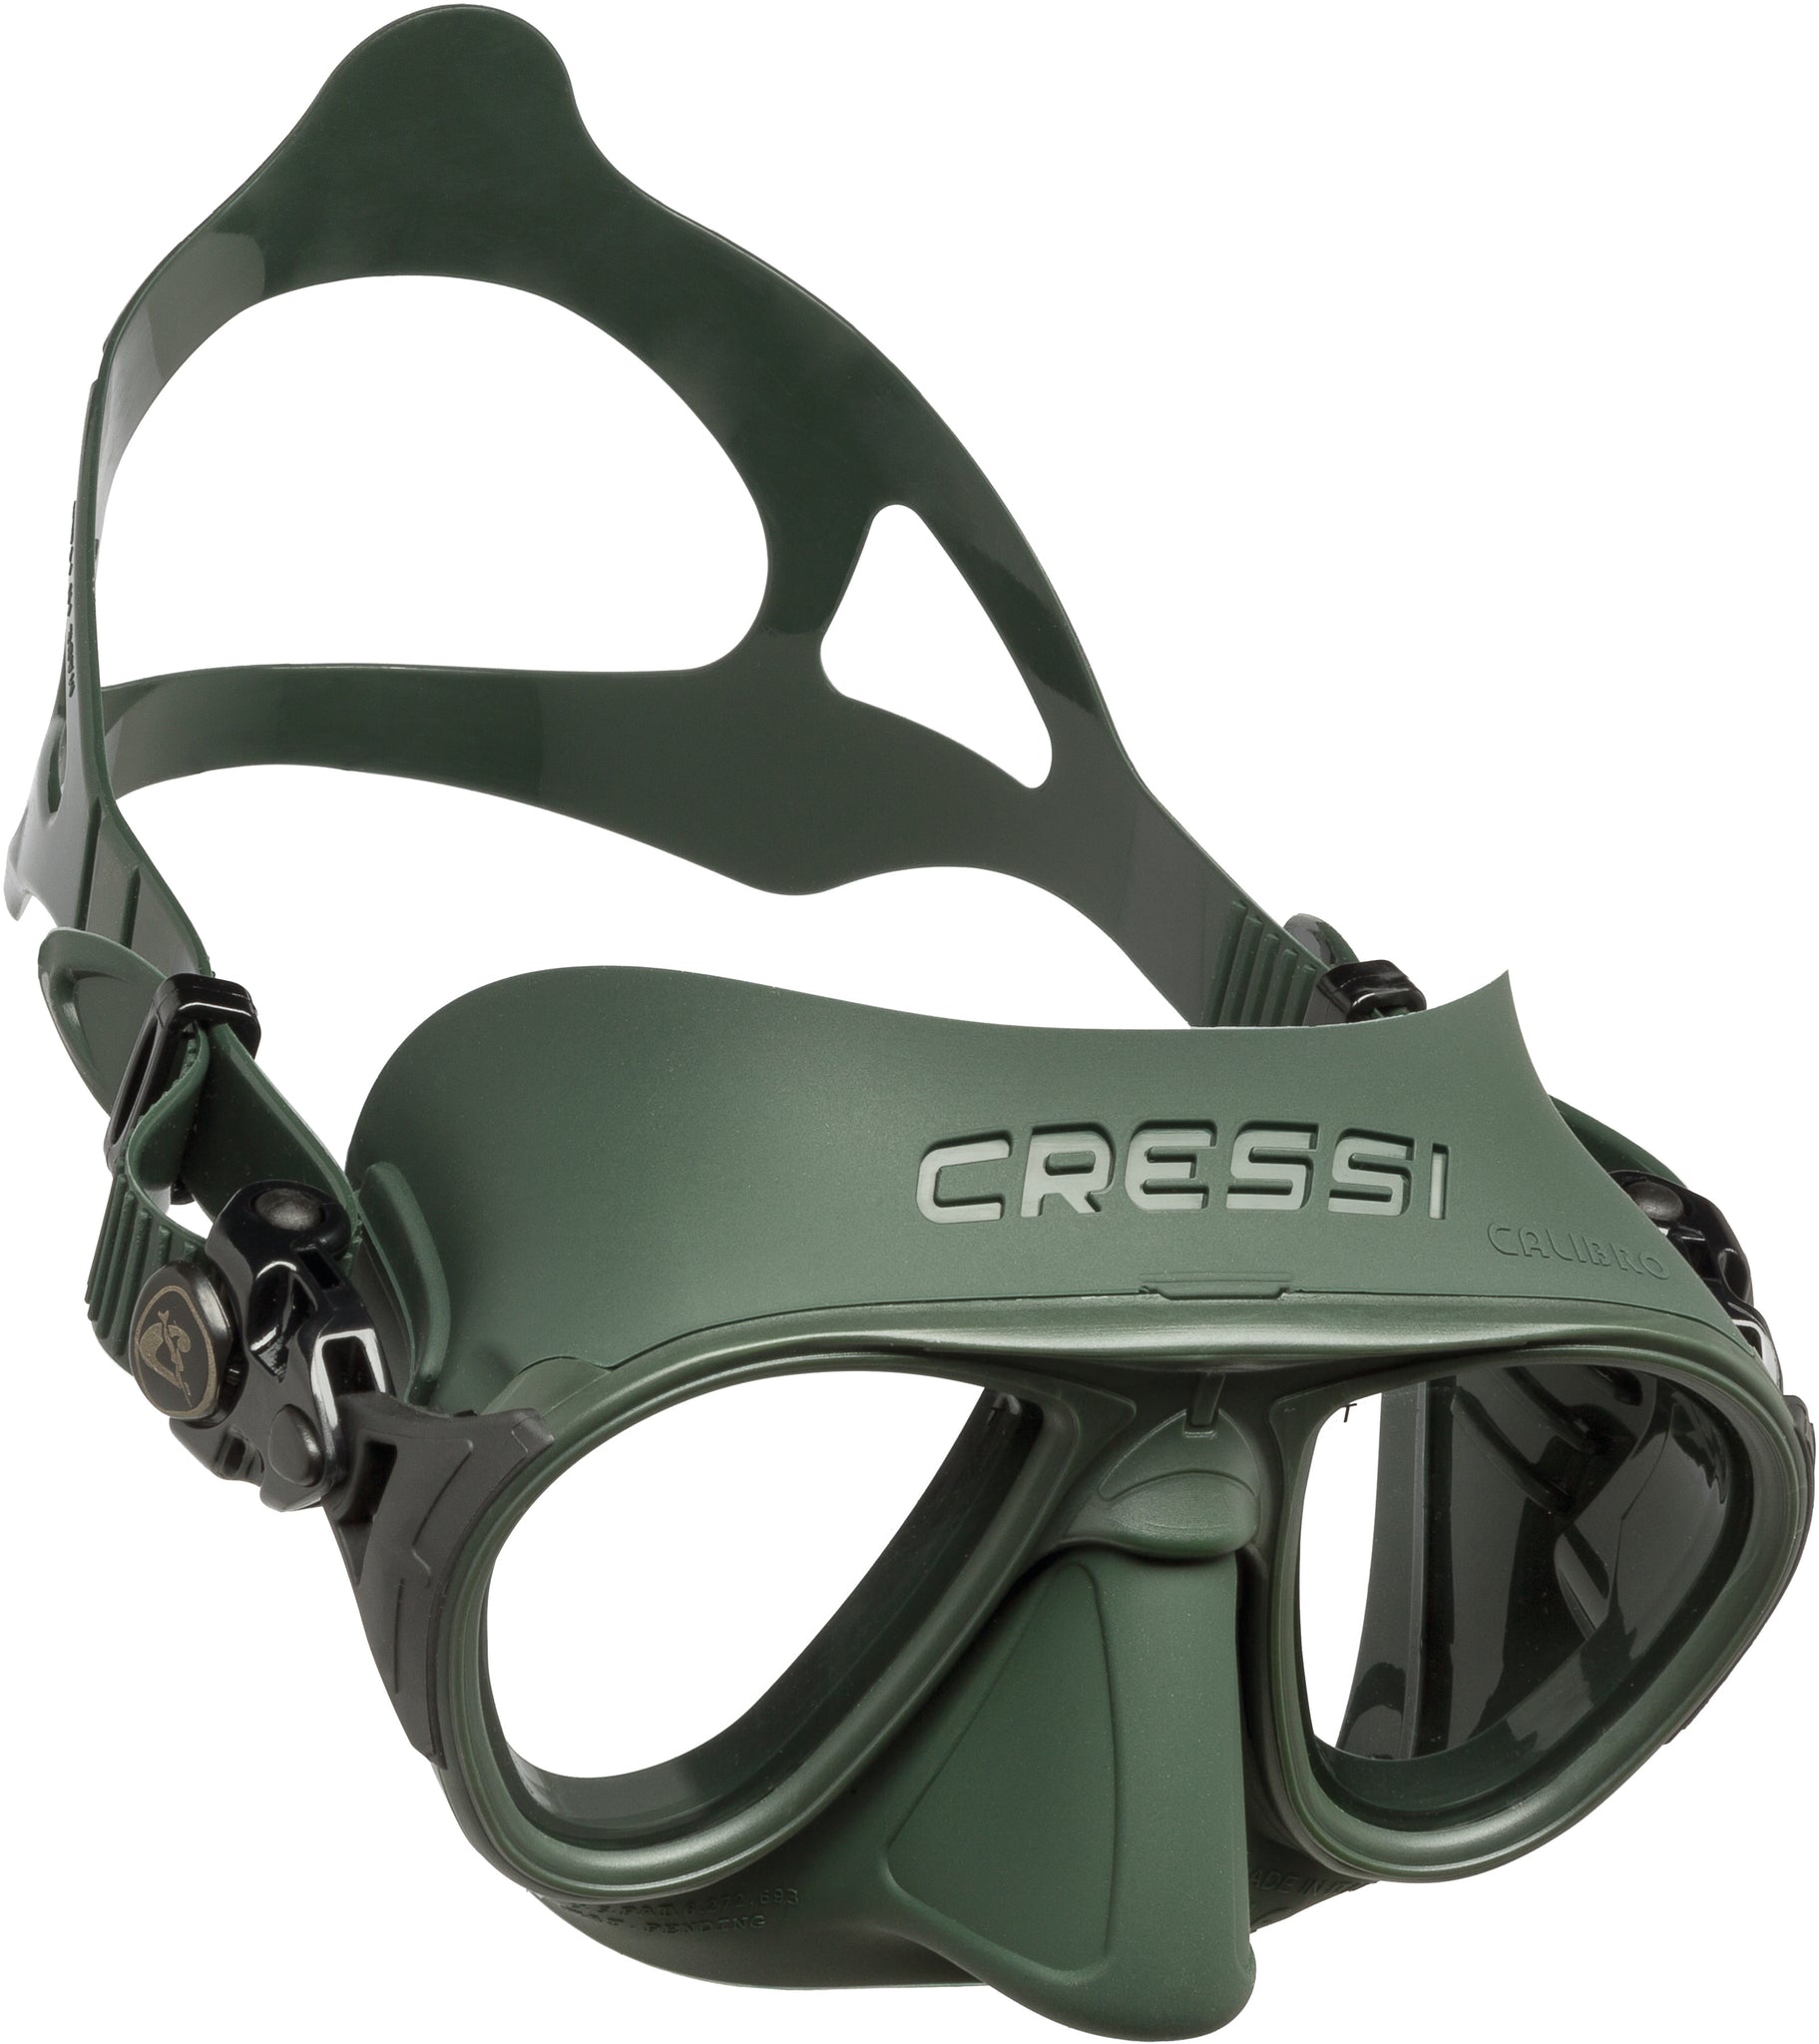 Green Scuba Mask: Explore the Underwater World with Clarity and Elegance